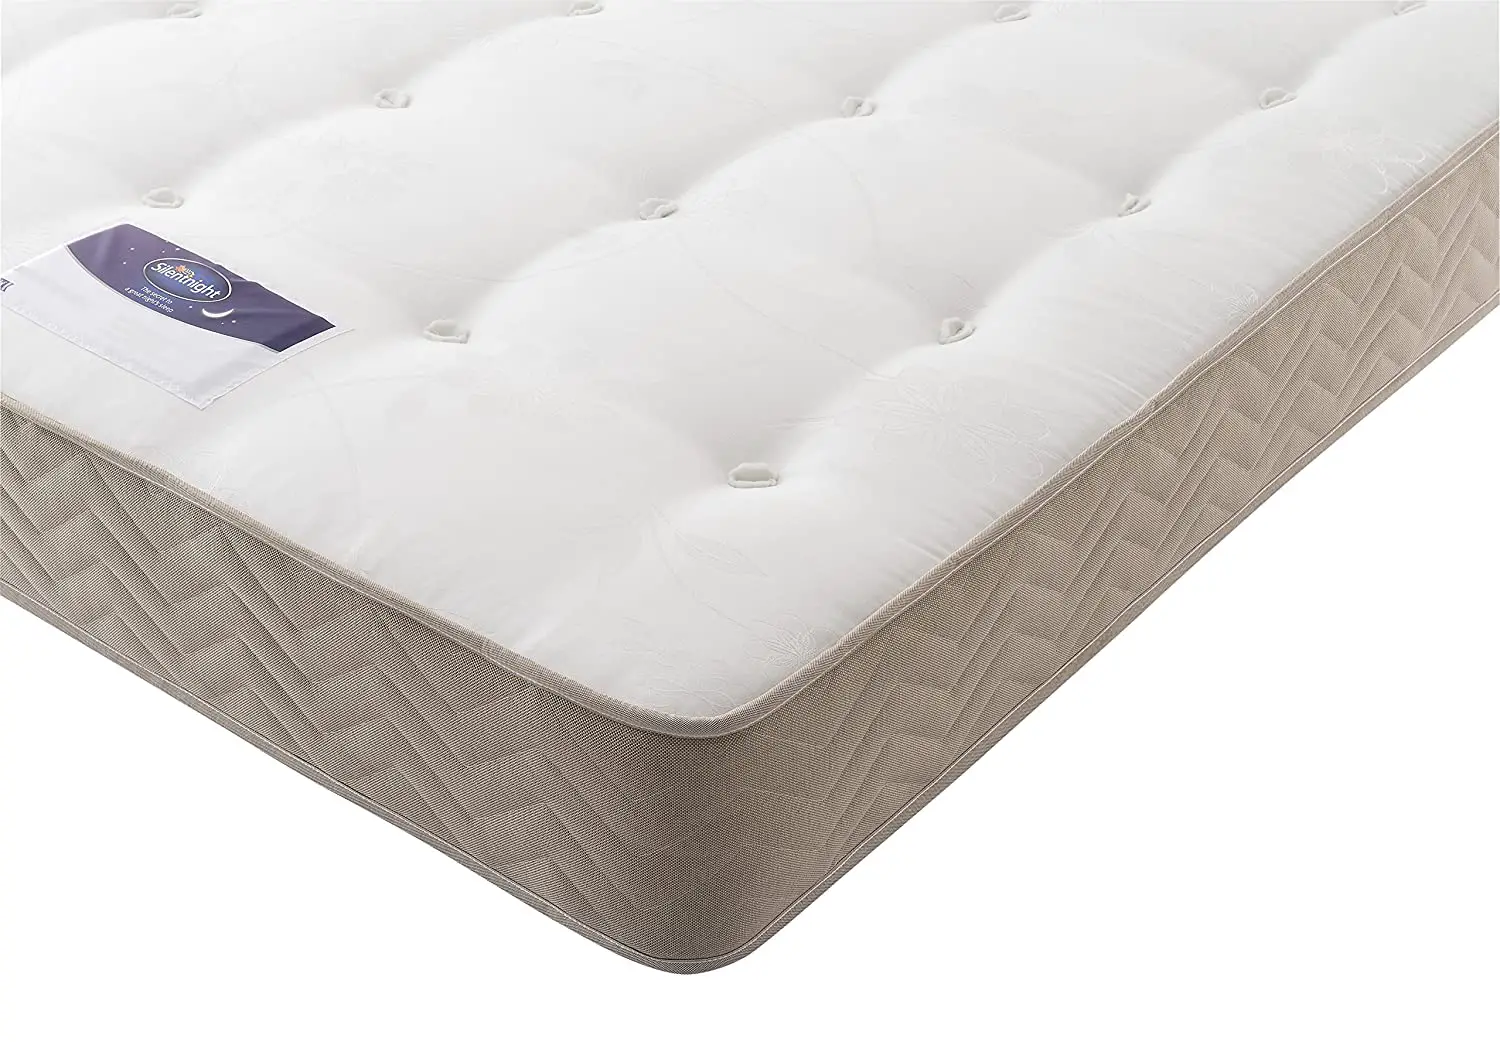 The Best Mattress For Back Pain 2018: Our Top 10 Comparison